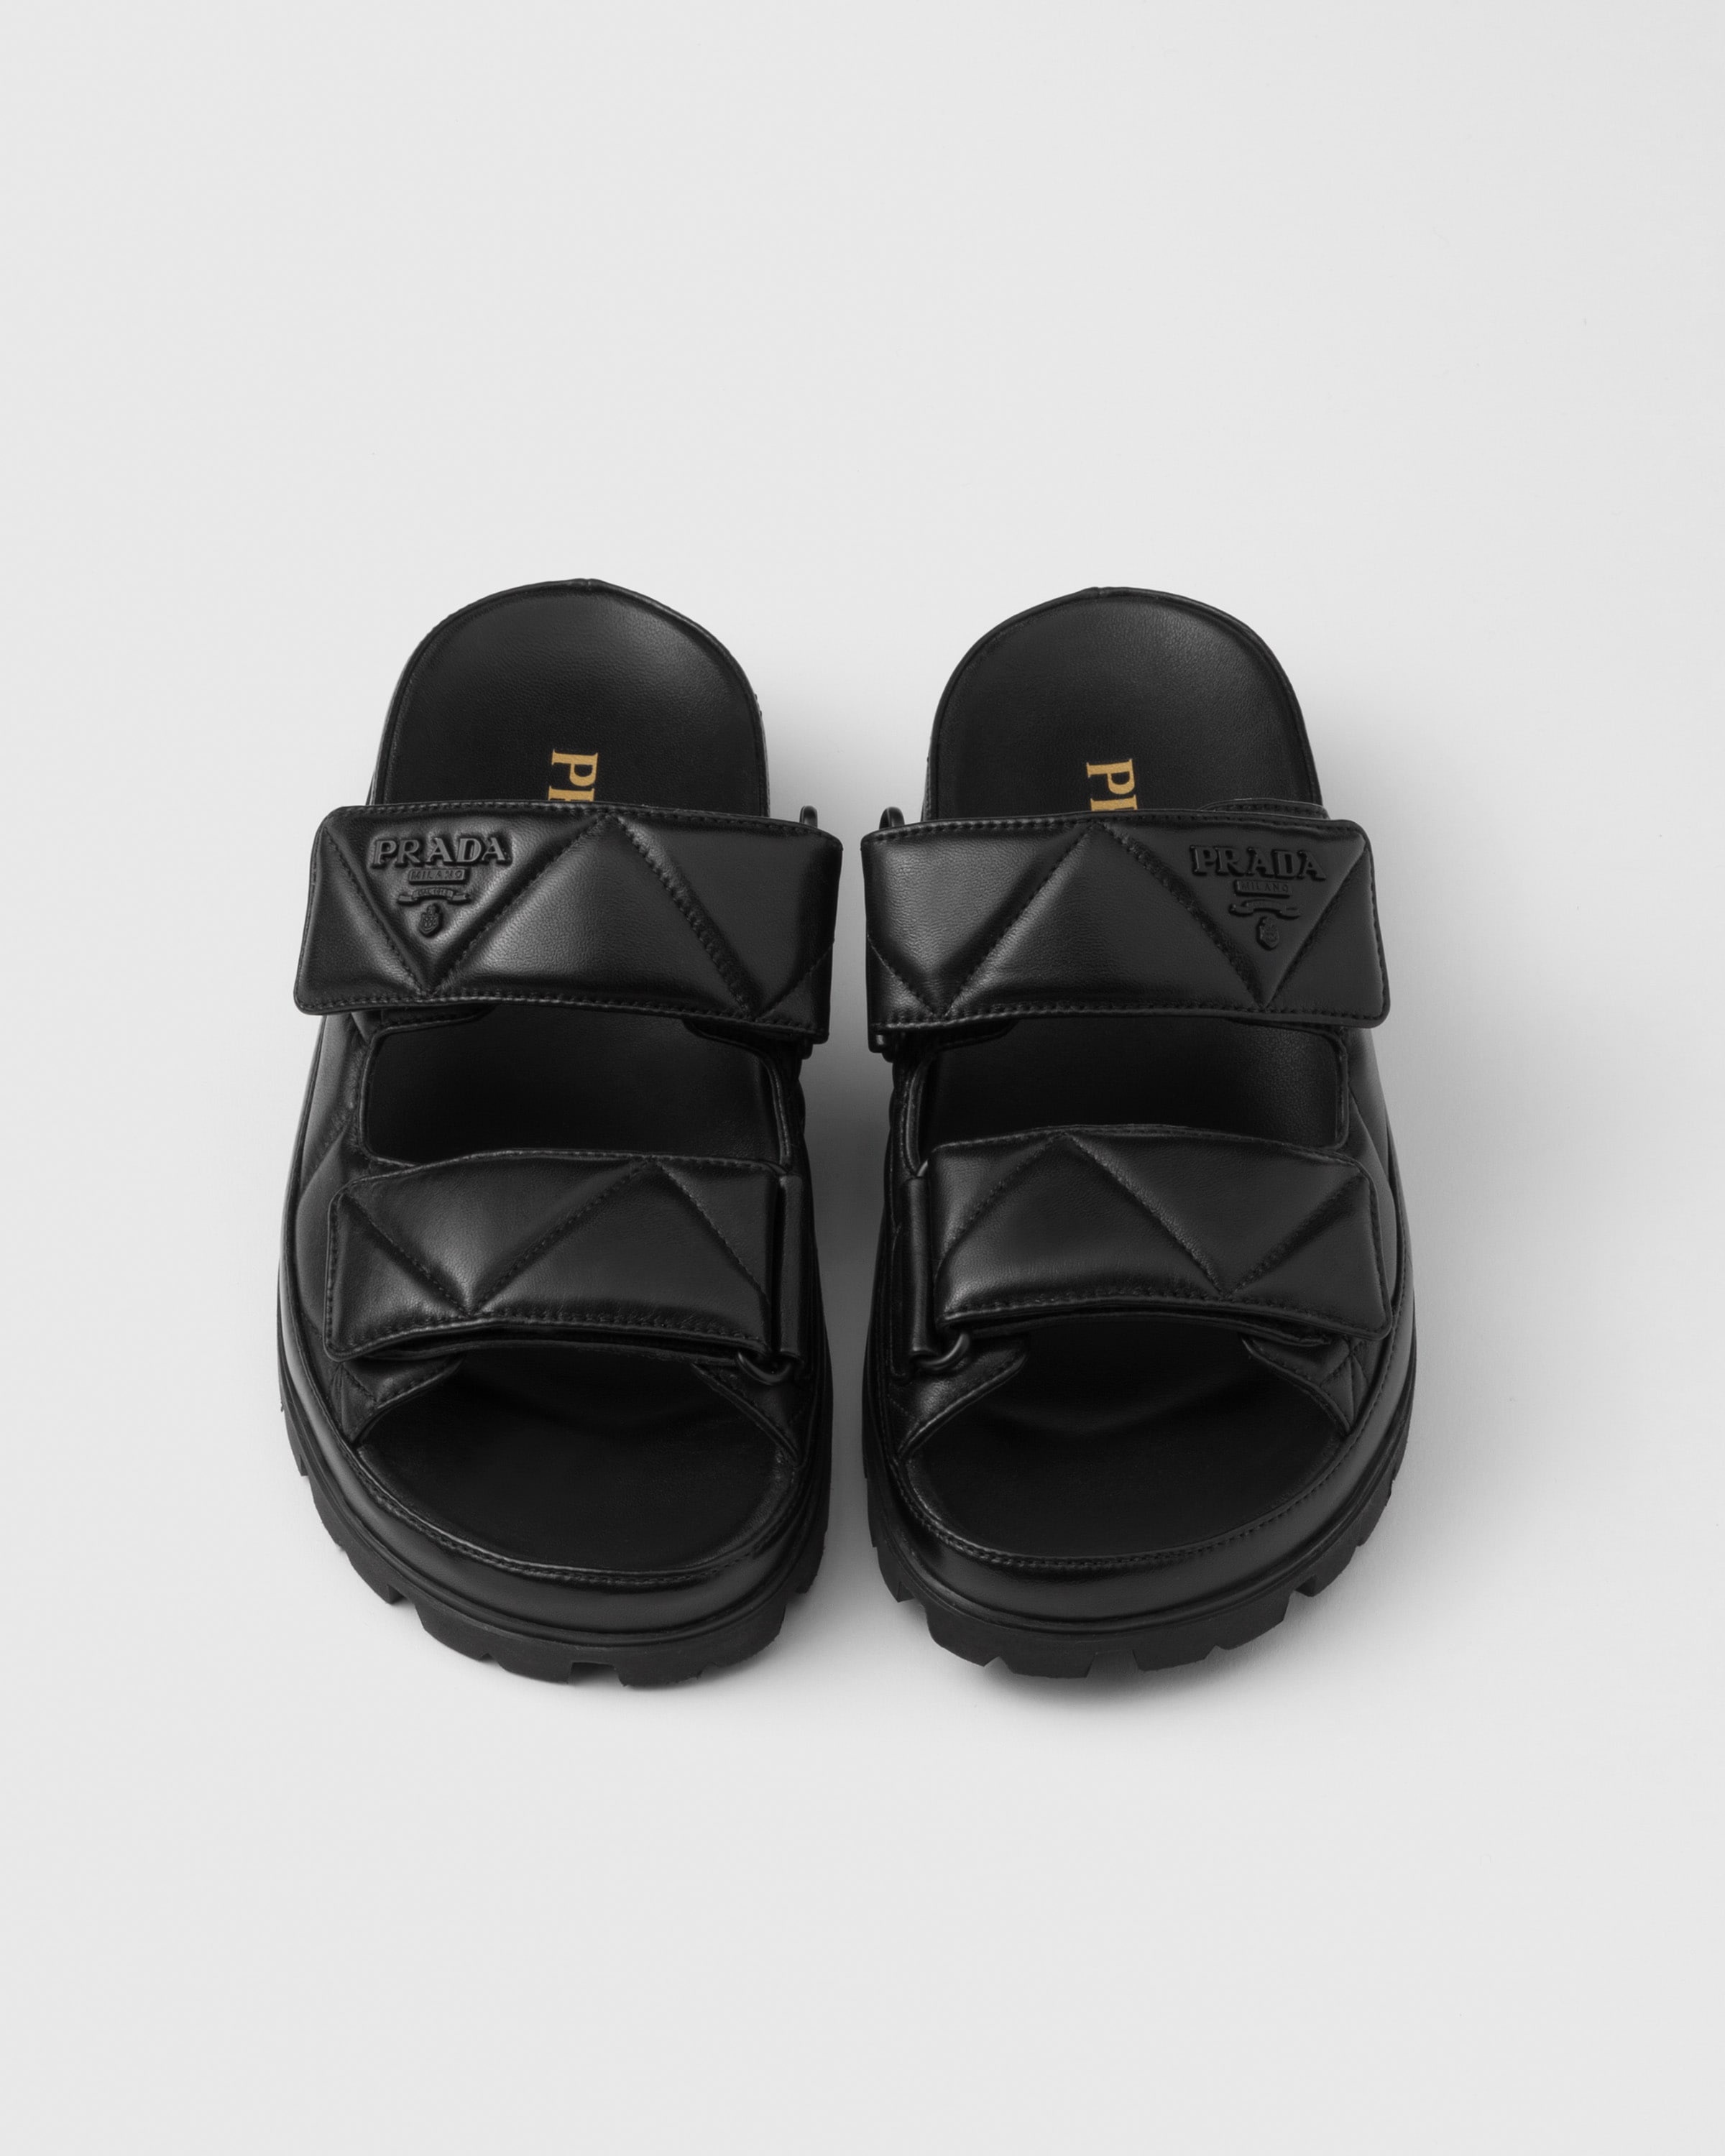 Padded nappa leather sandals - 3